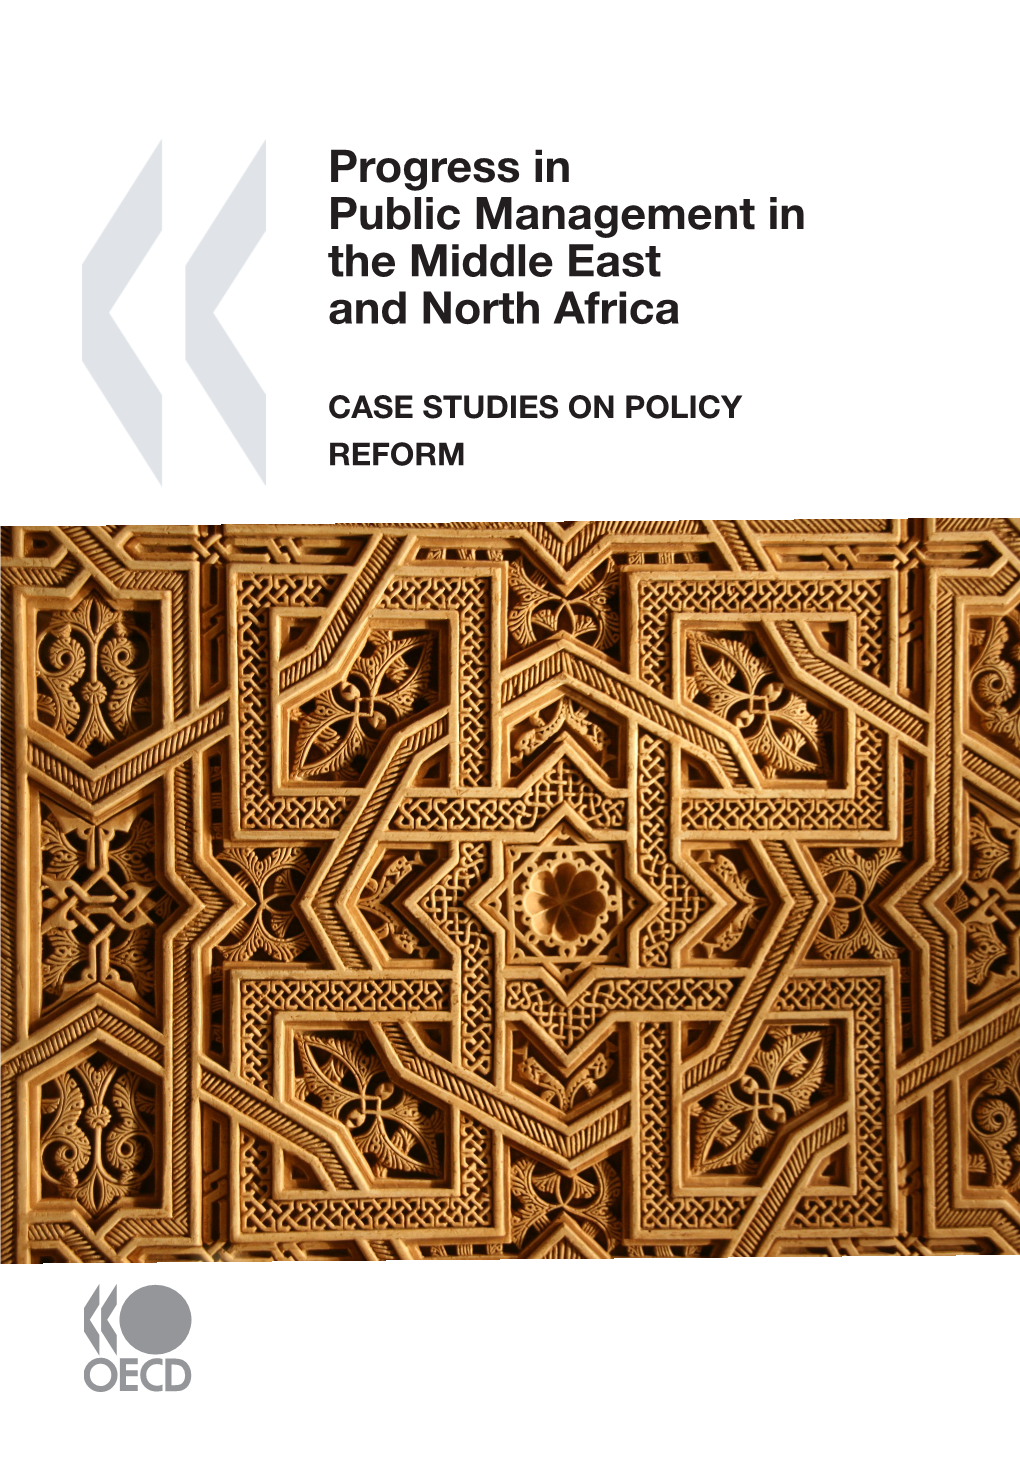 Progress in Public Management in the Middle East and North Africa